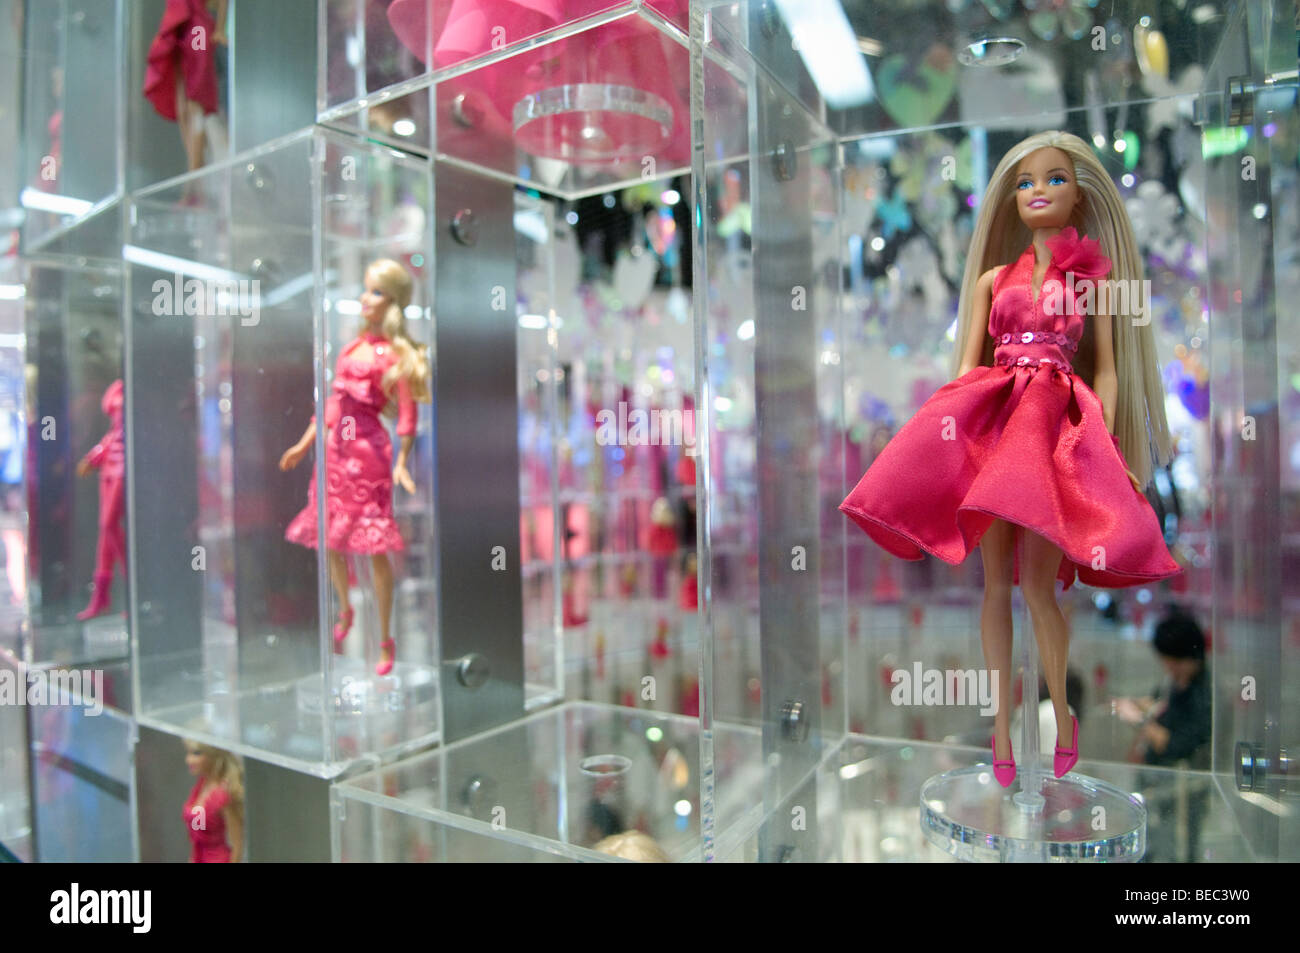 Hundreds of Barbie dolls are on display in the world's largest Barbie store, the flagship in Shanghai China. Stock Photo